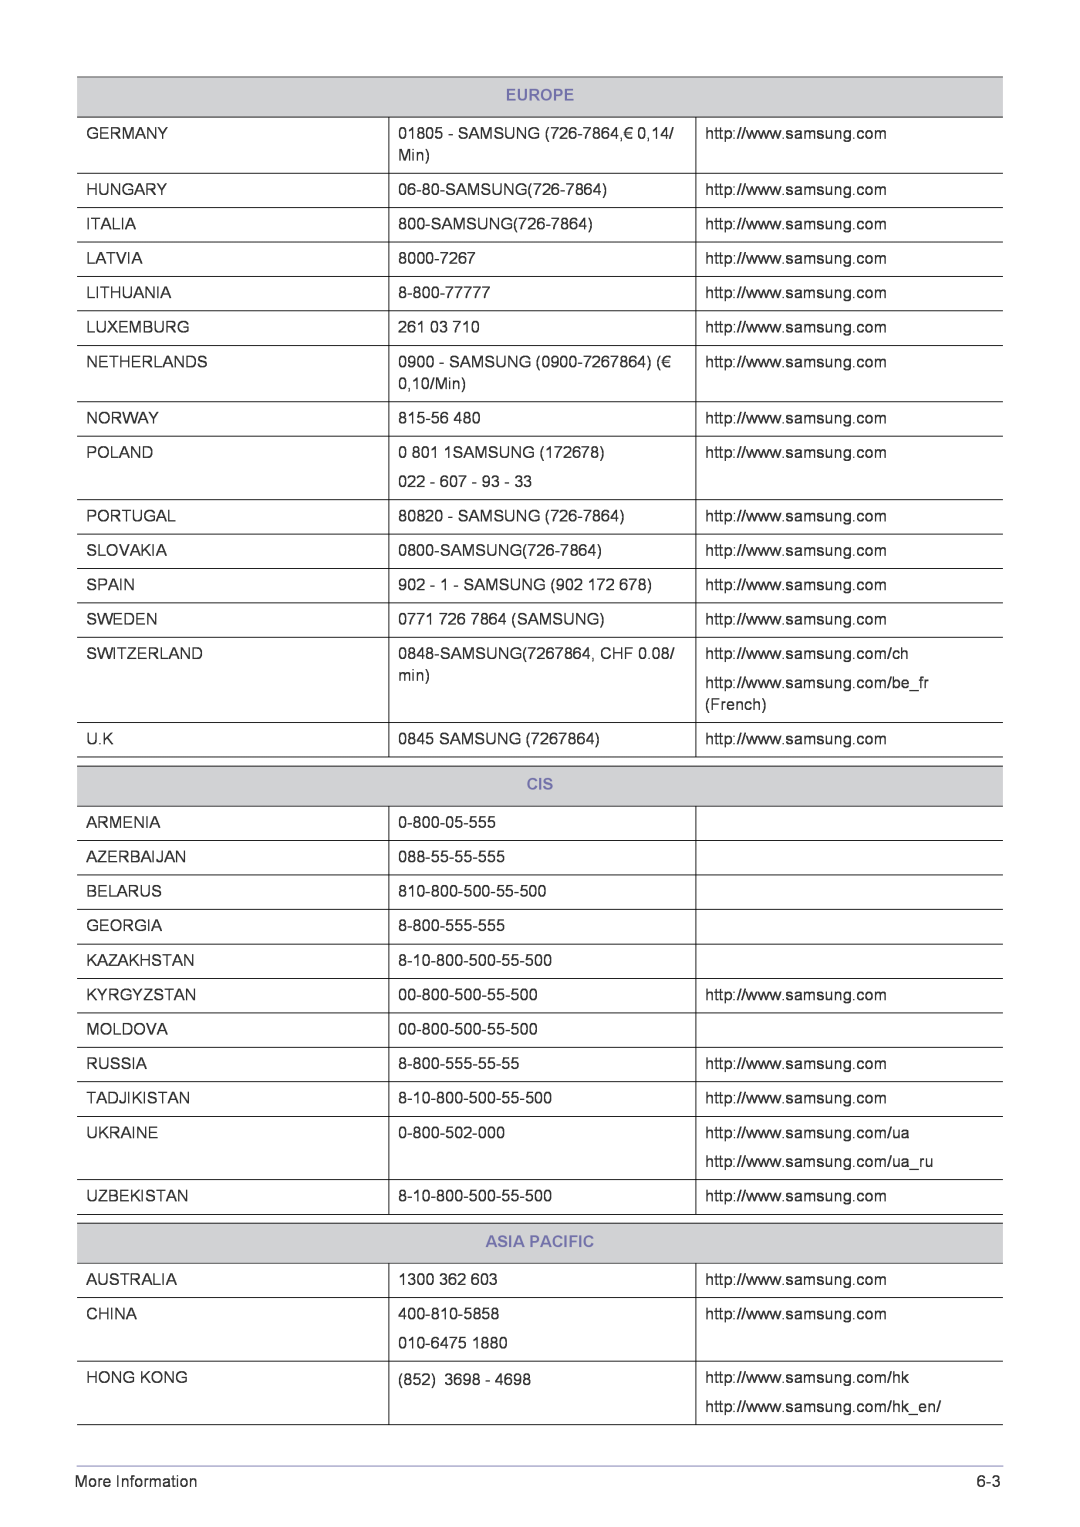 Samsung PX2370 user manual Europe, Asia Pacific 